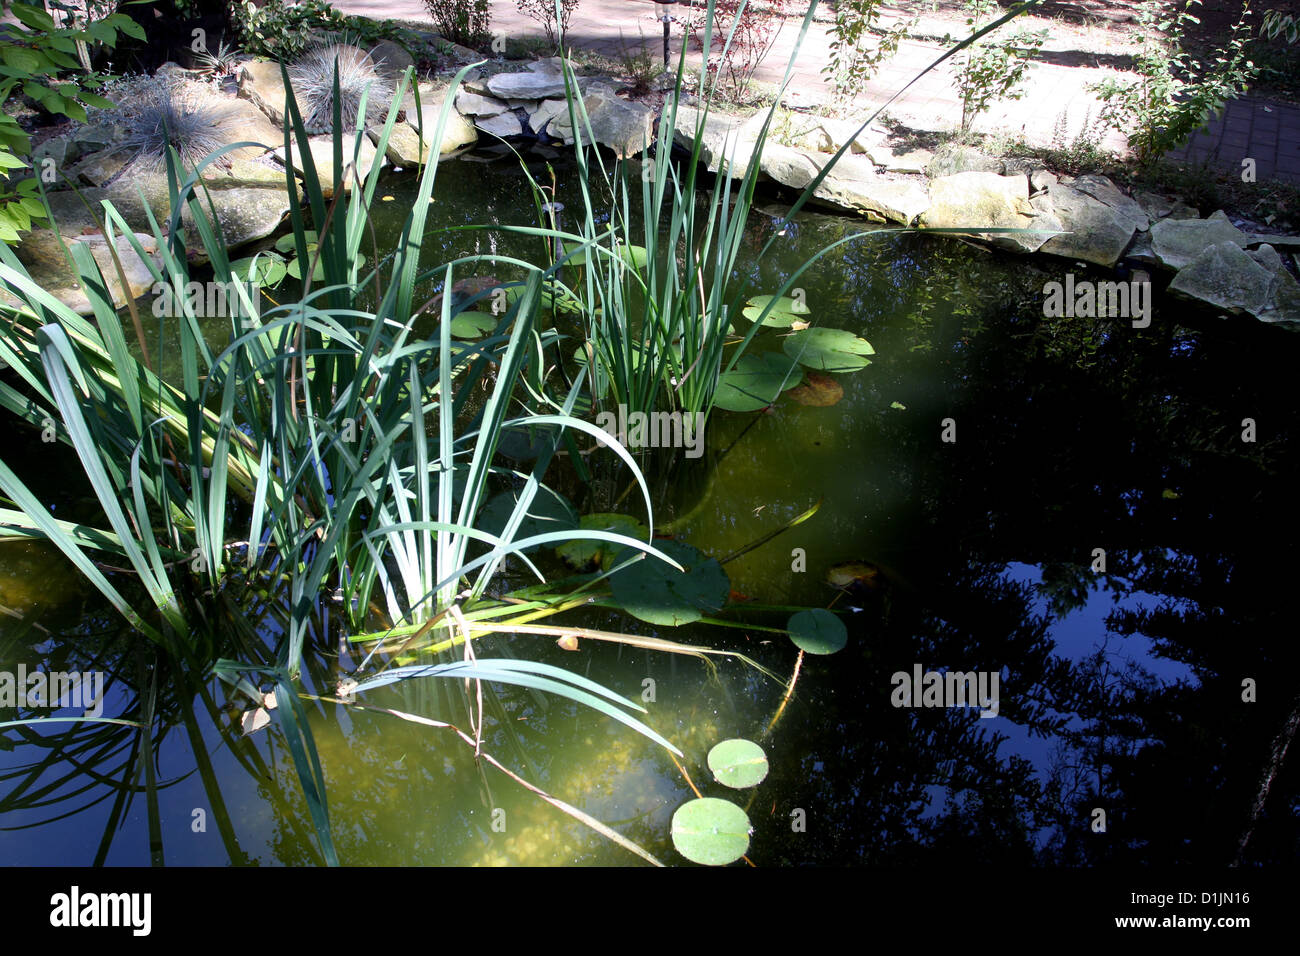 Small garden pond water plants growing in a shallow pond Stock Photo